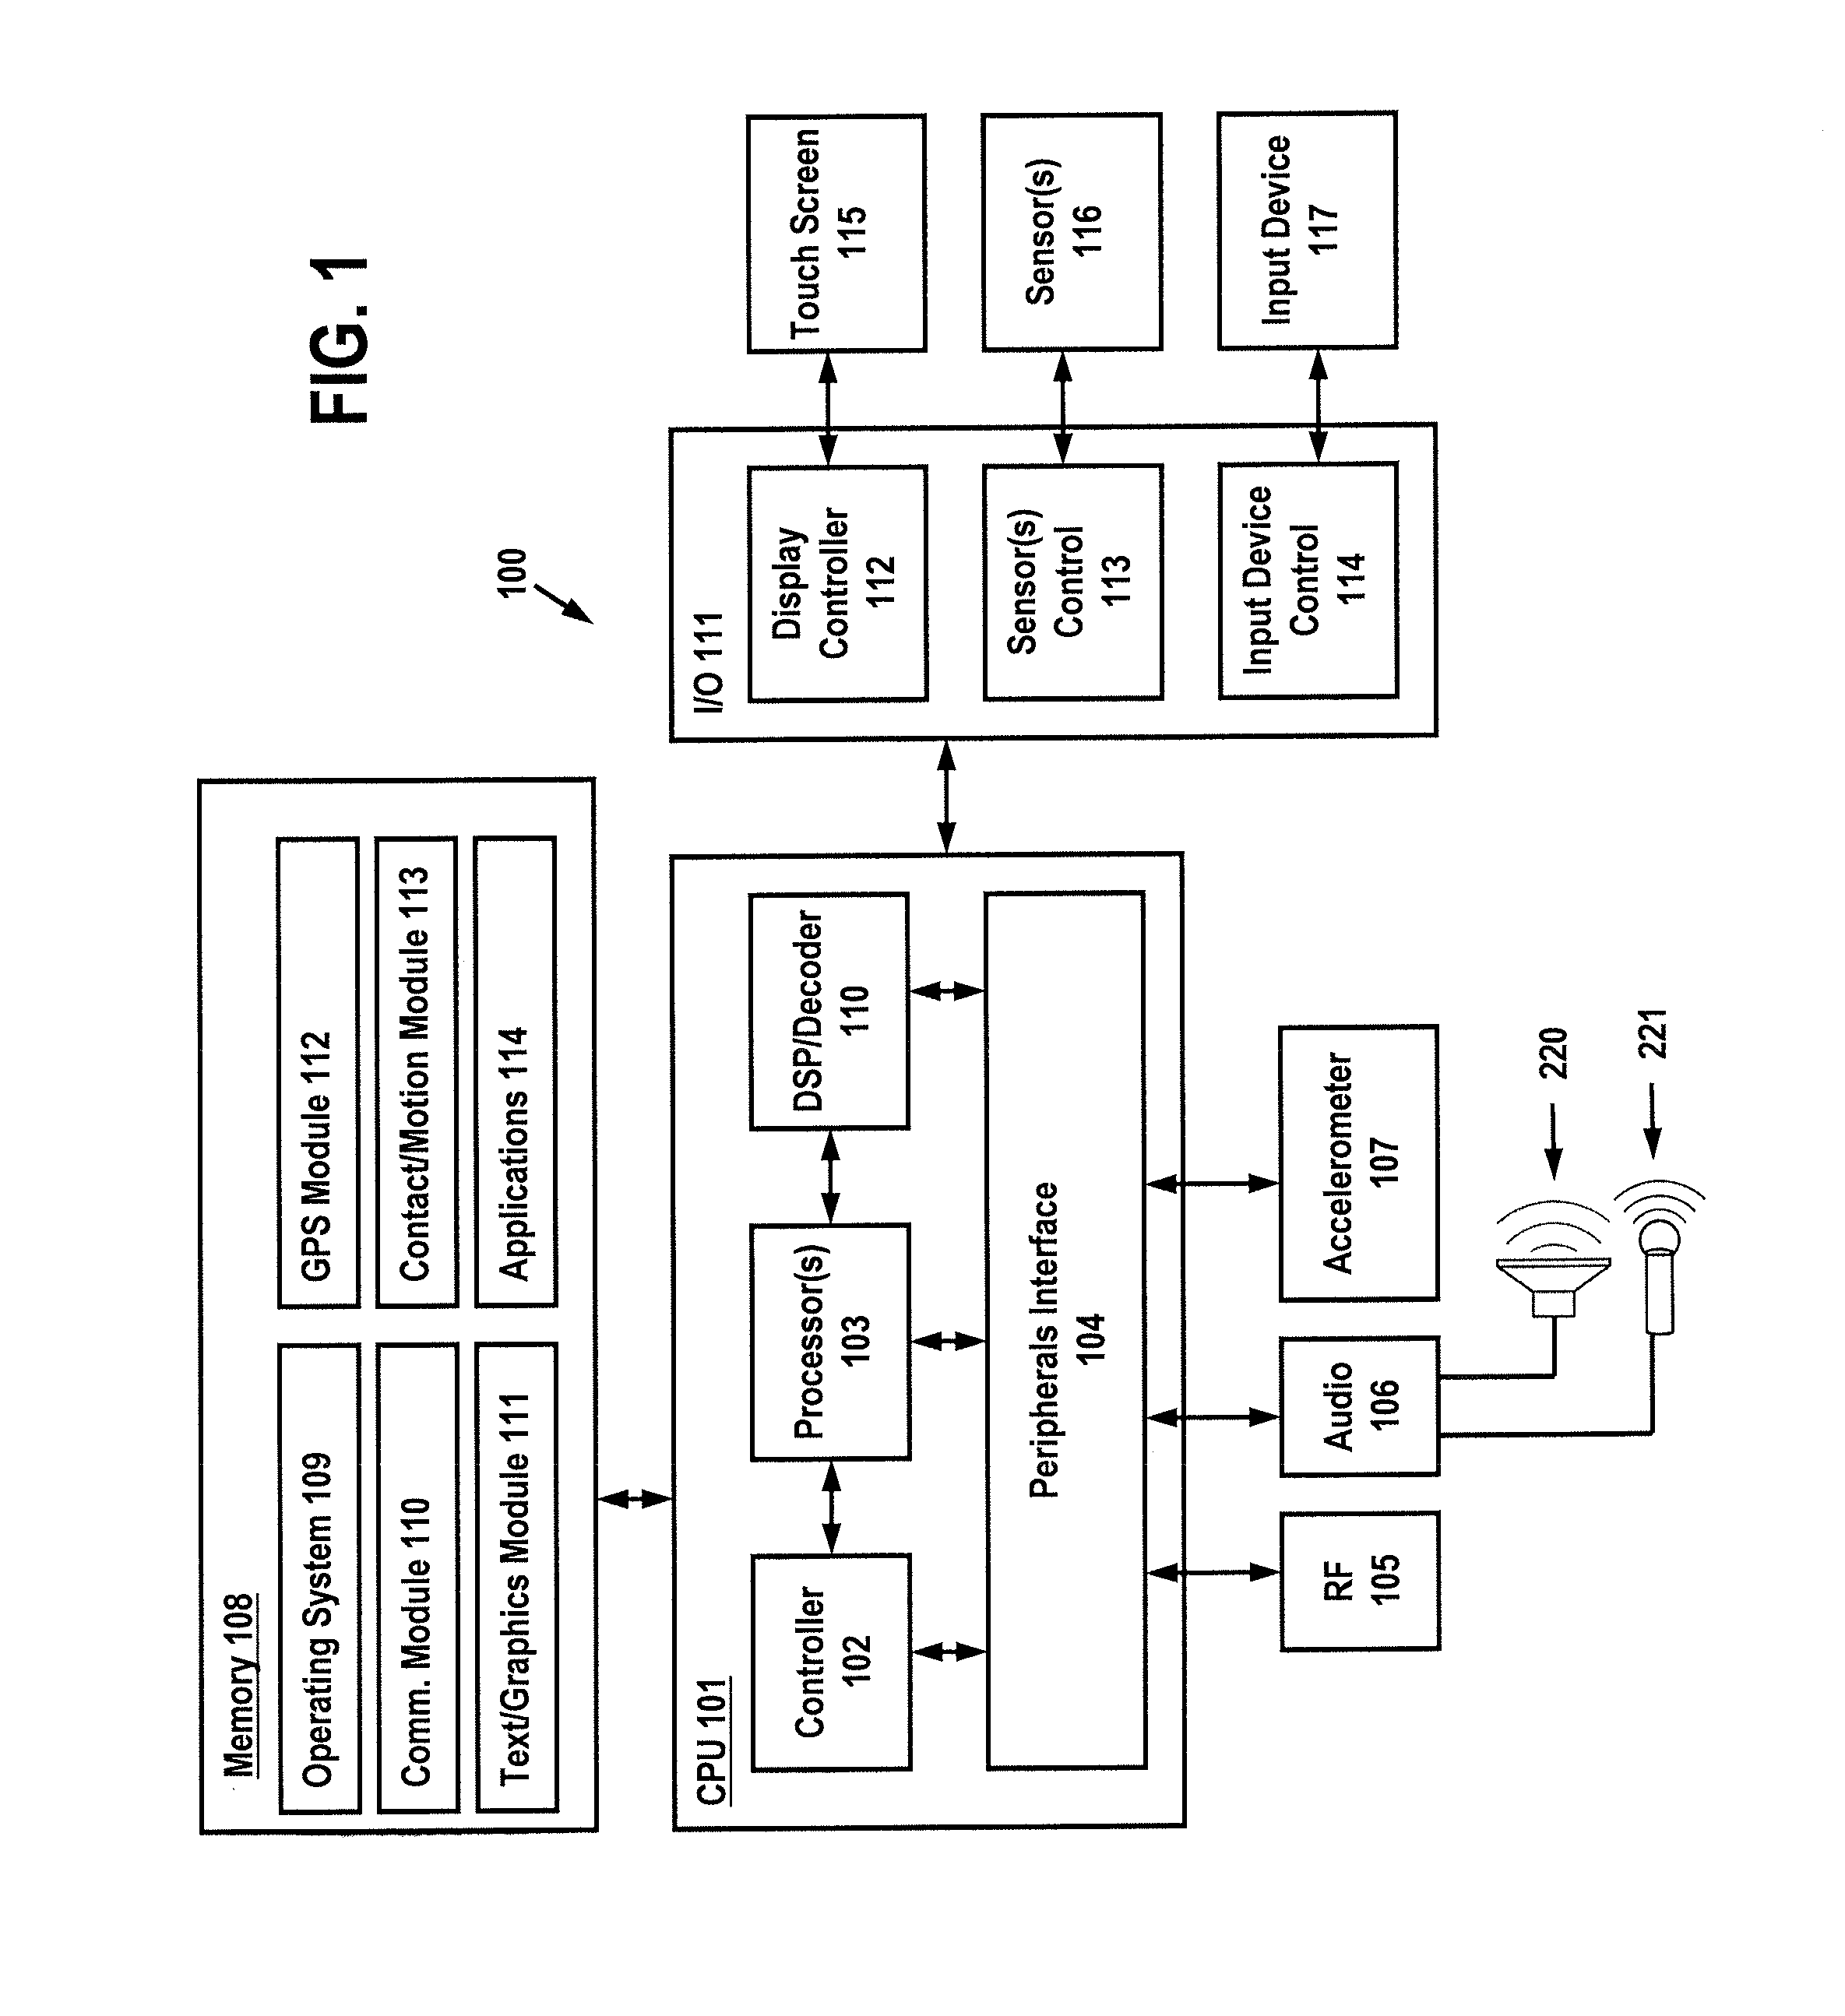 Apparatus, System and Methods for Portable Device Tracking Using Temporary Privileged Access